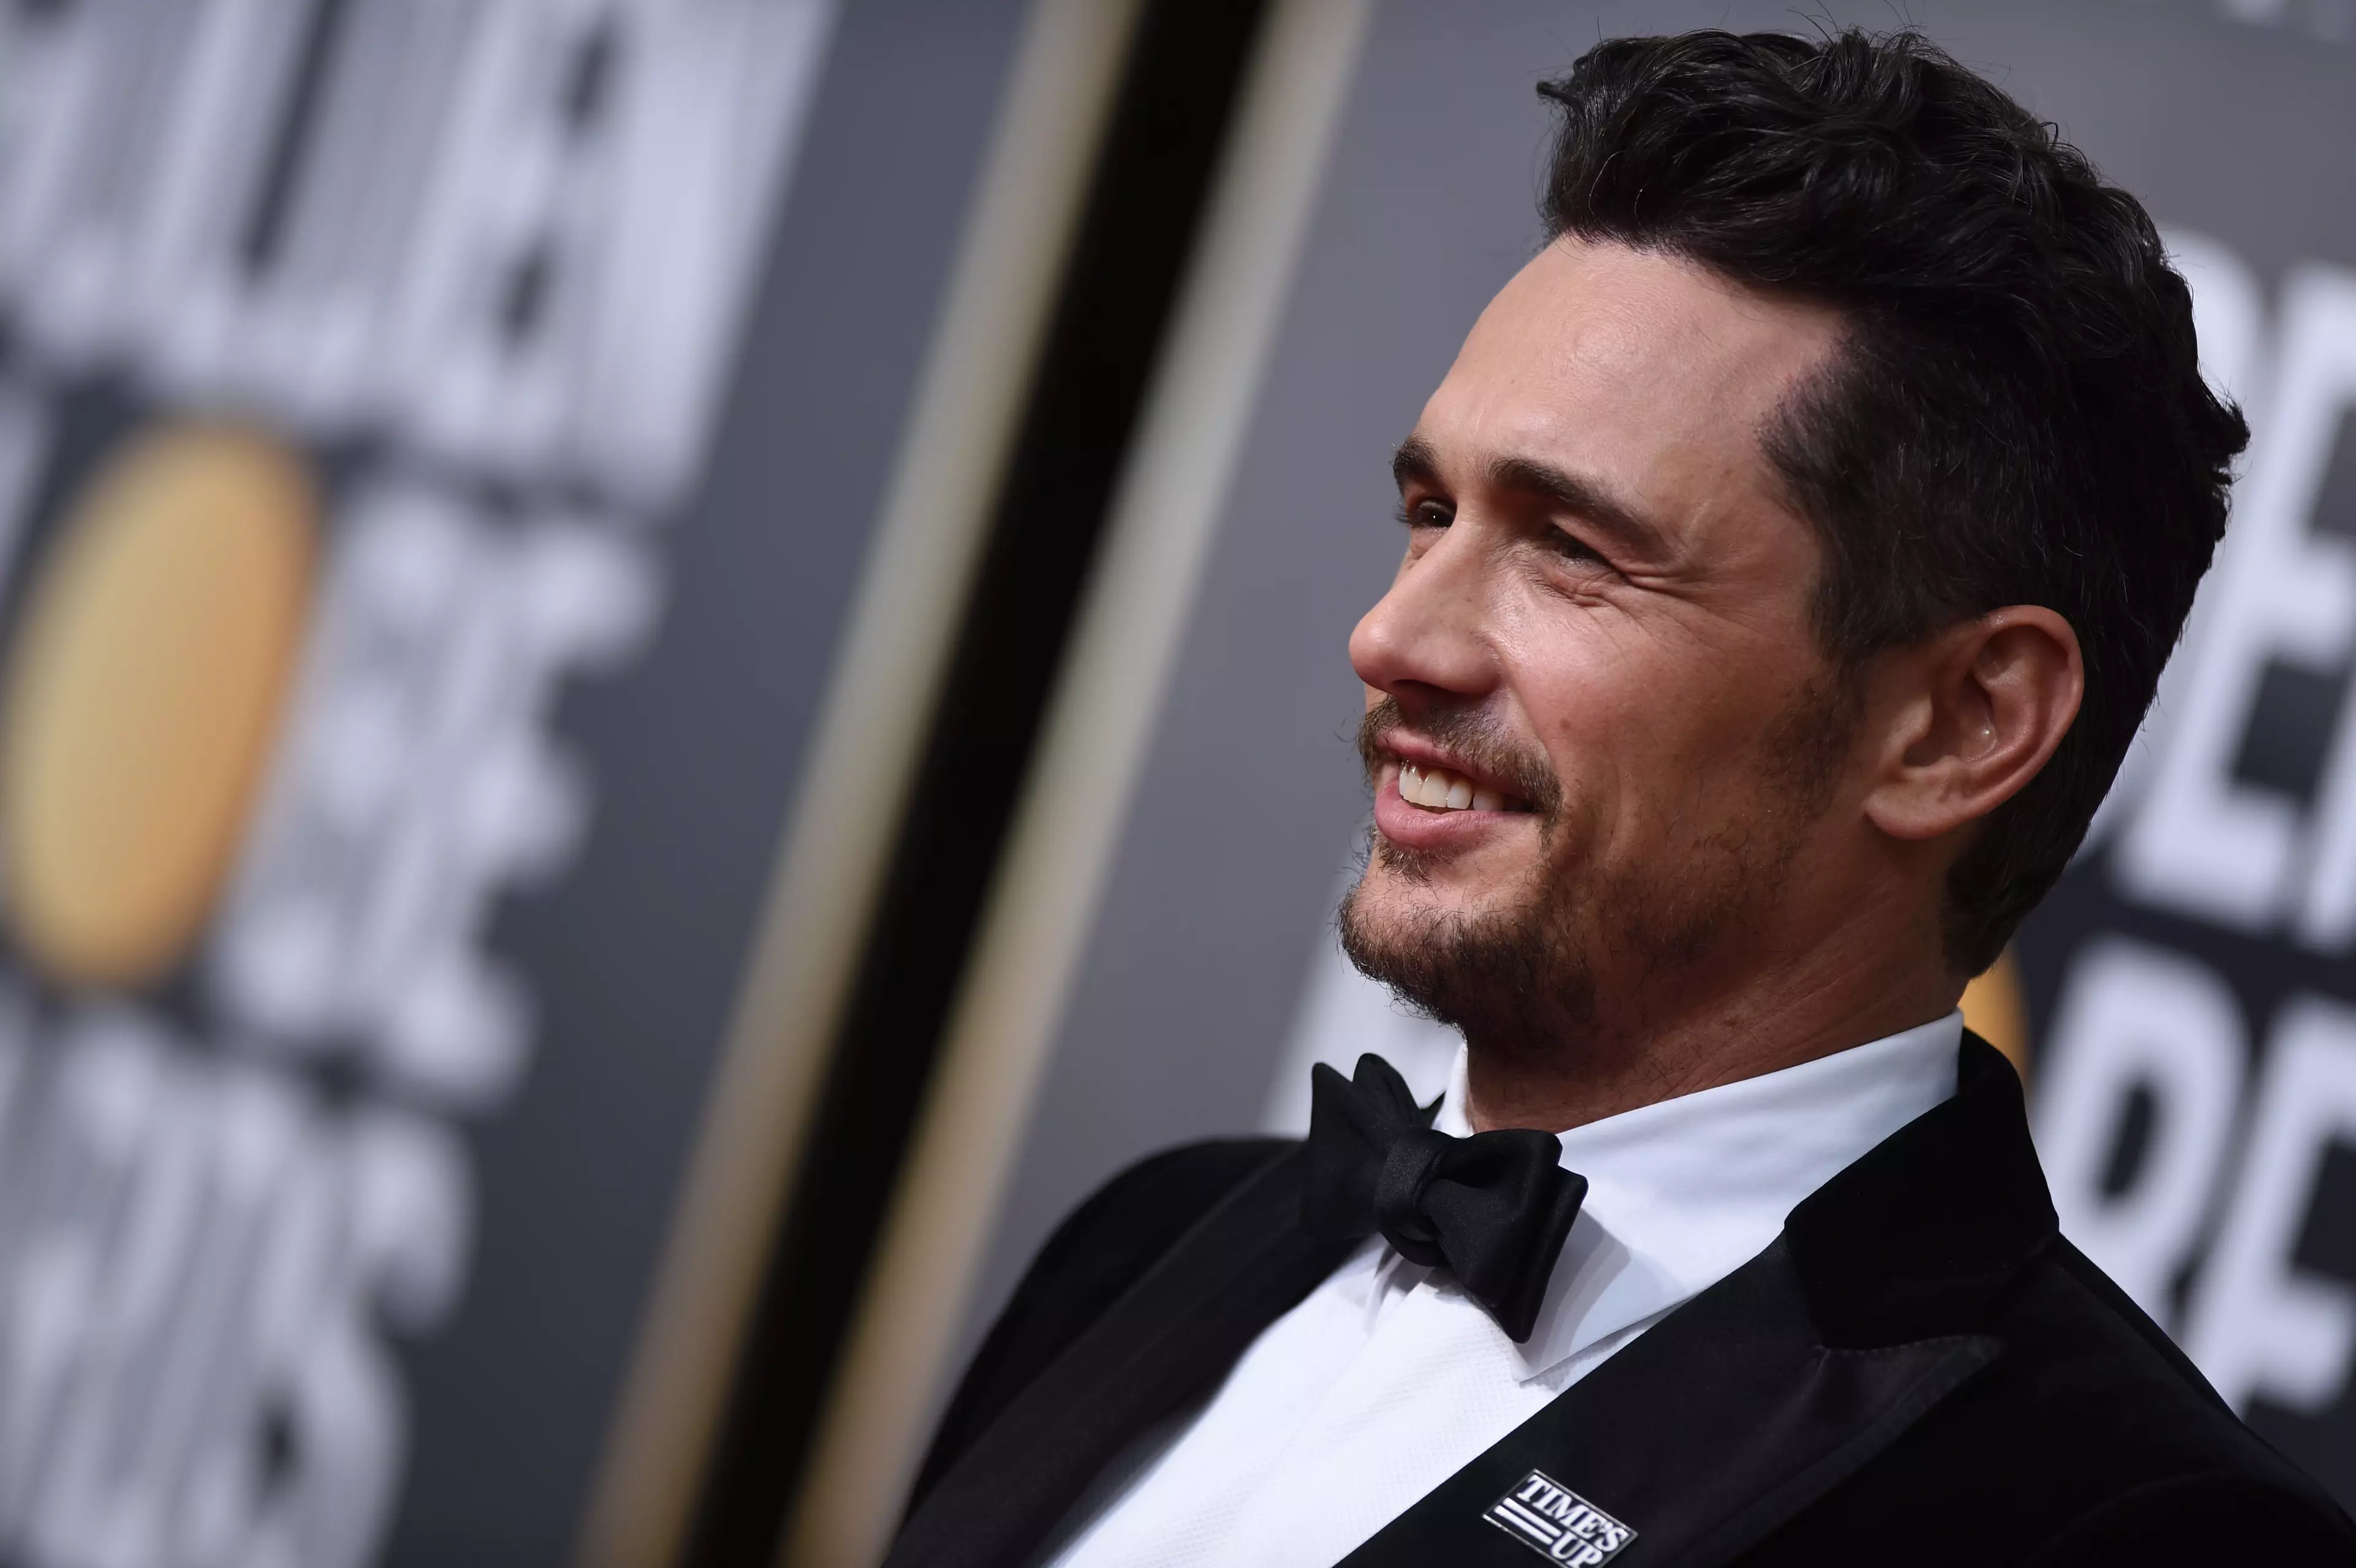 James Franco Is The First Star Of 2018 To Be Hit With Sexual Misconduct Allegations